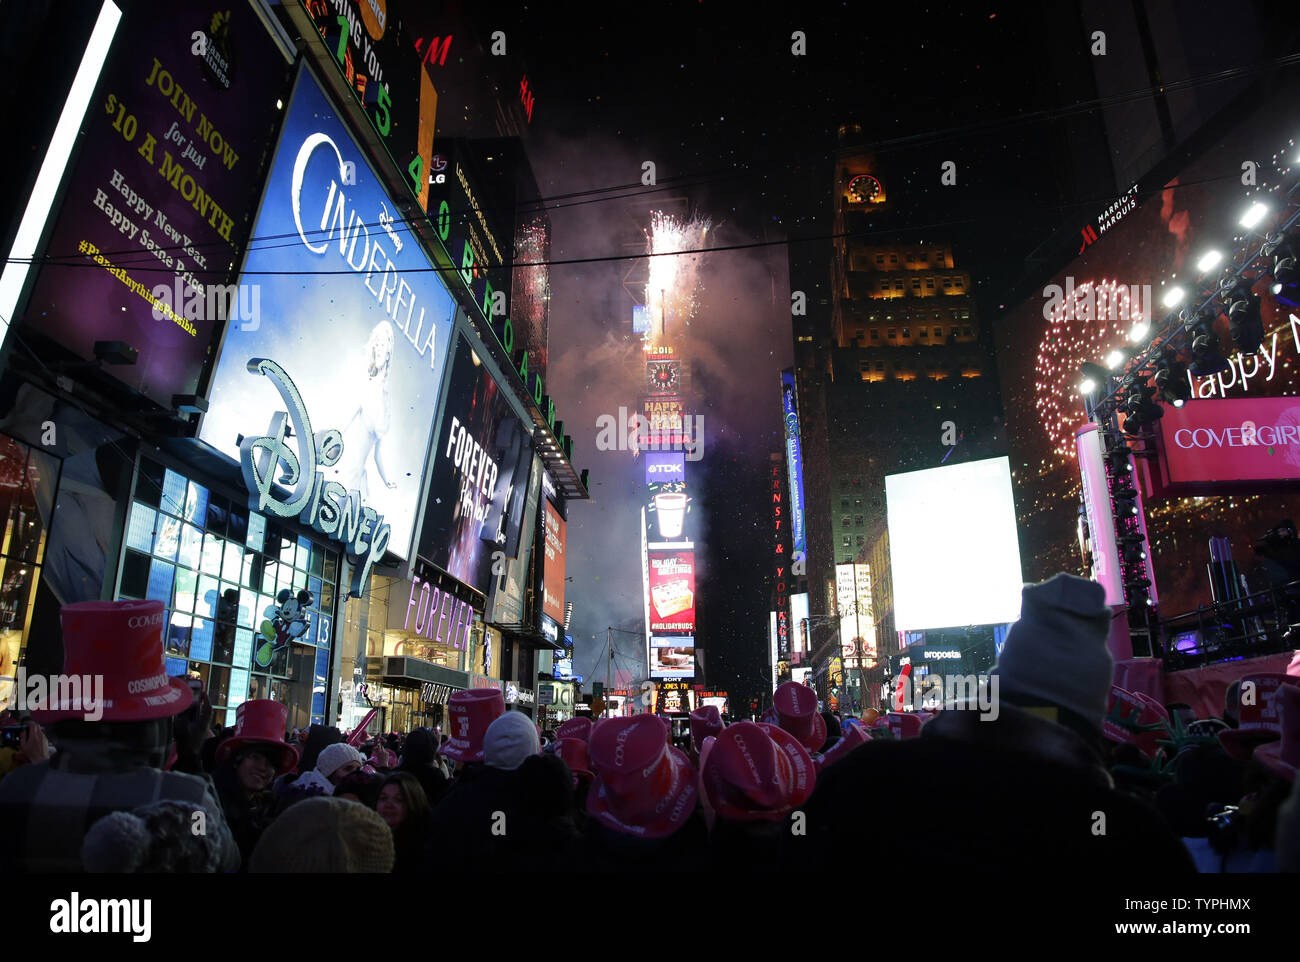 https://c8.alamy.com/comp/TYPHMX/people-watch-as-fireworks-go-off-in-times-square-after-midnight-on-new-years-eve-in-new-york-city-on-january-1-2015-approximately-one-million-revelers-stood-in-times-square-to-watch-the-ball-drop-and-bring-in-the-new-year-on-the-first-day-of-2015-upijohn-angelillo-TYPHMX.jpg